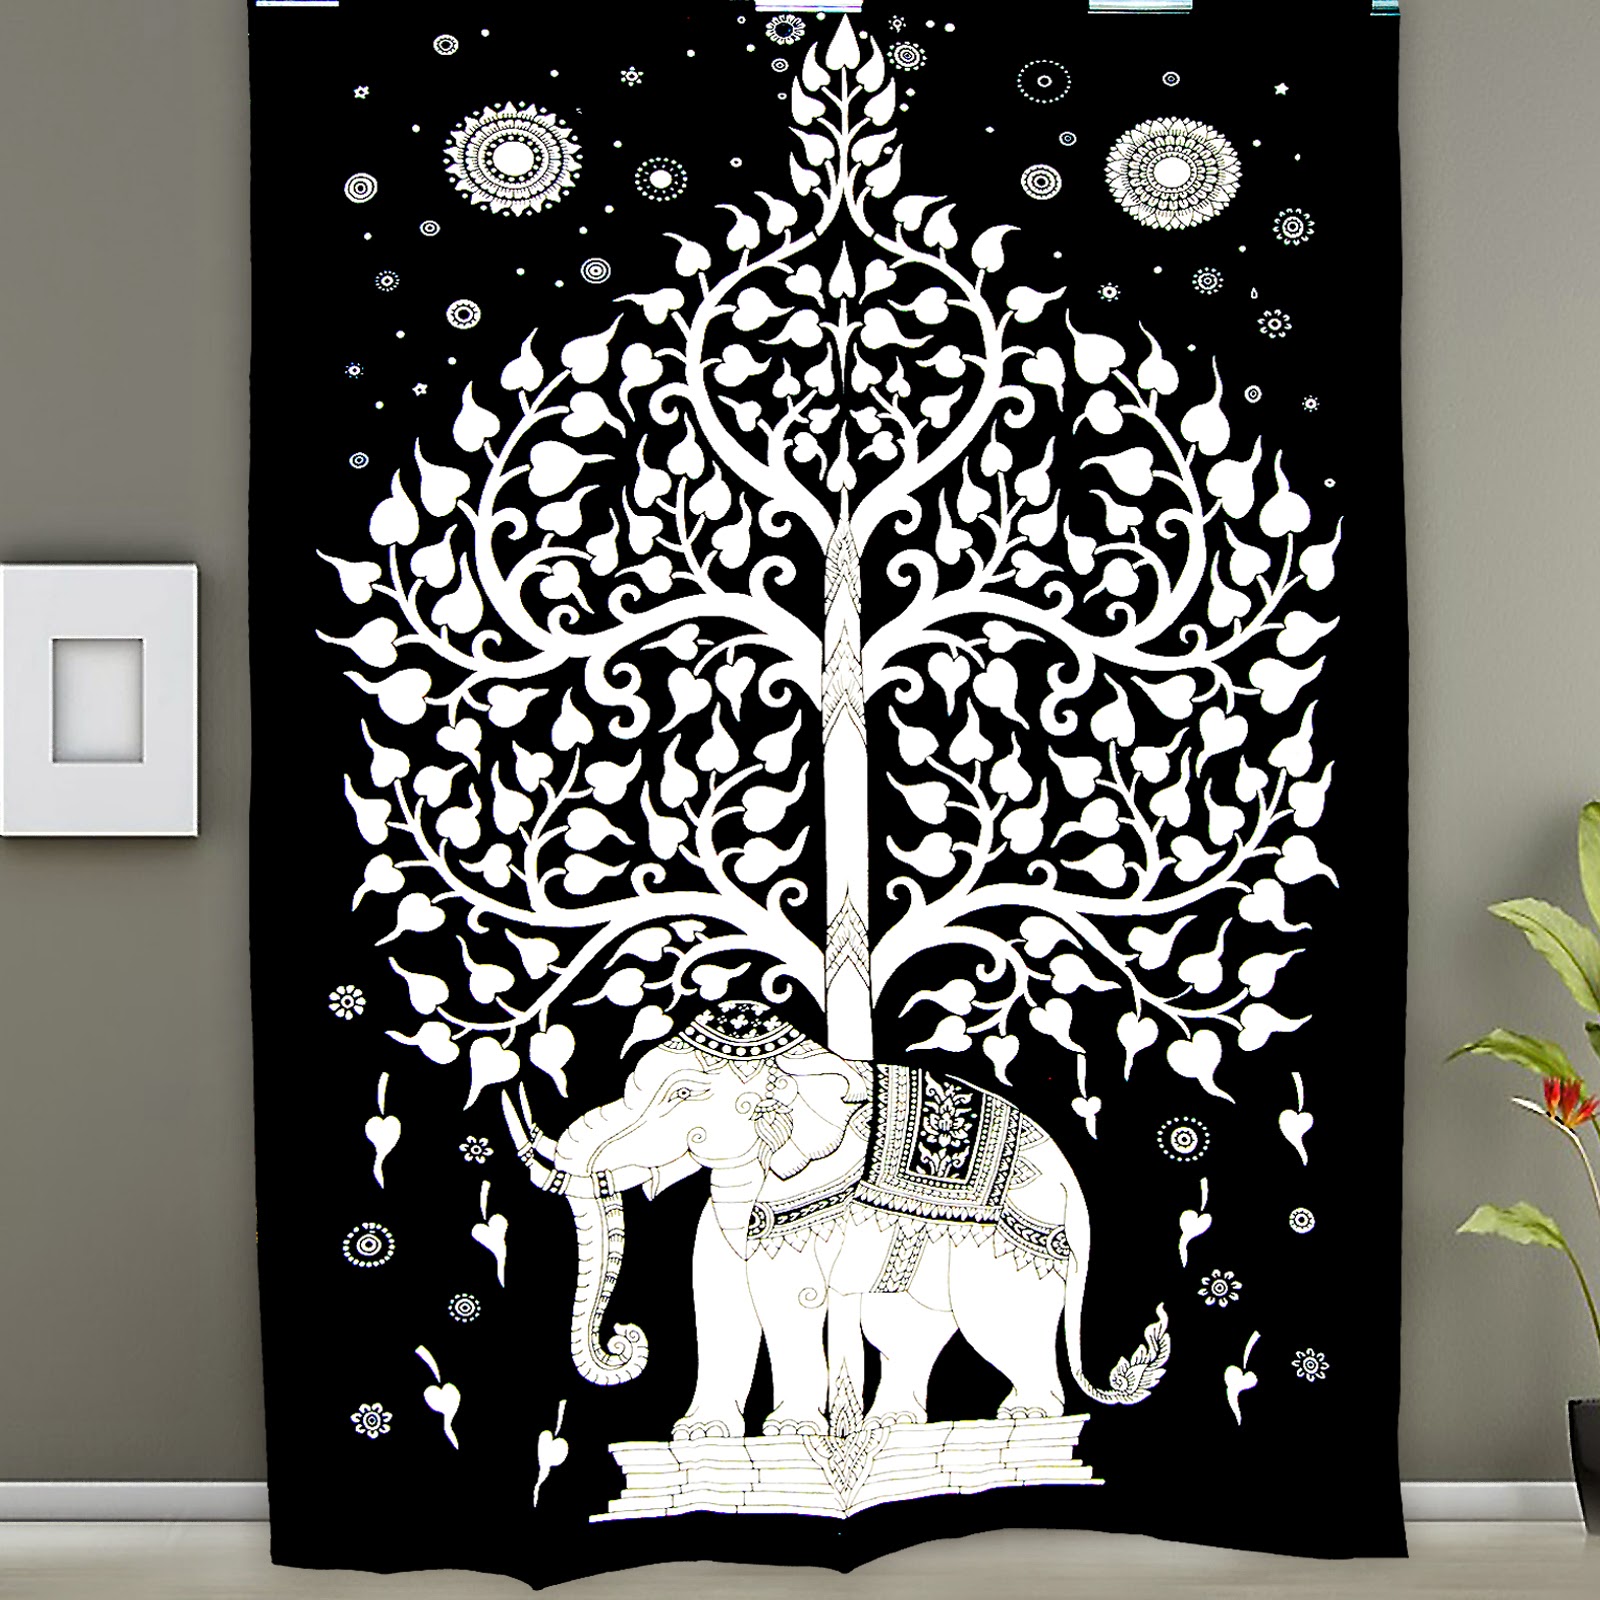  Indian Twin Elephant Tapestry Hanging Tree Of Life Hippie Bedding Throws Cotton Home Decor Art Traditional Royal Jaipur Beach Twin Beddings